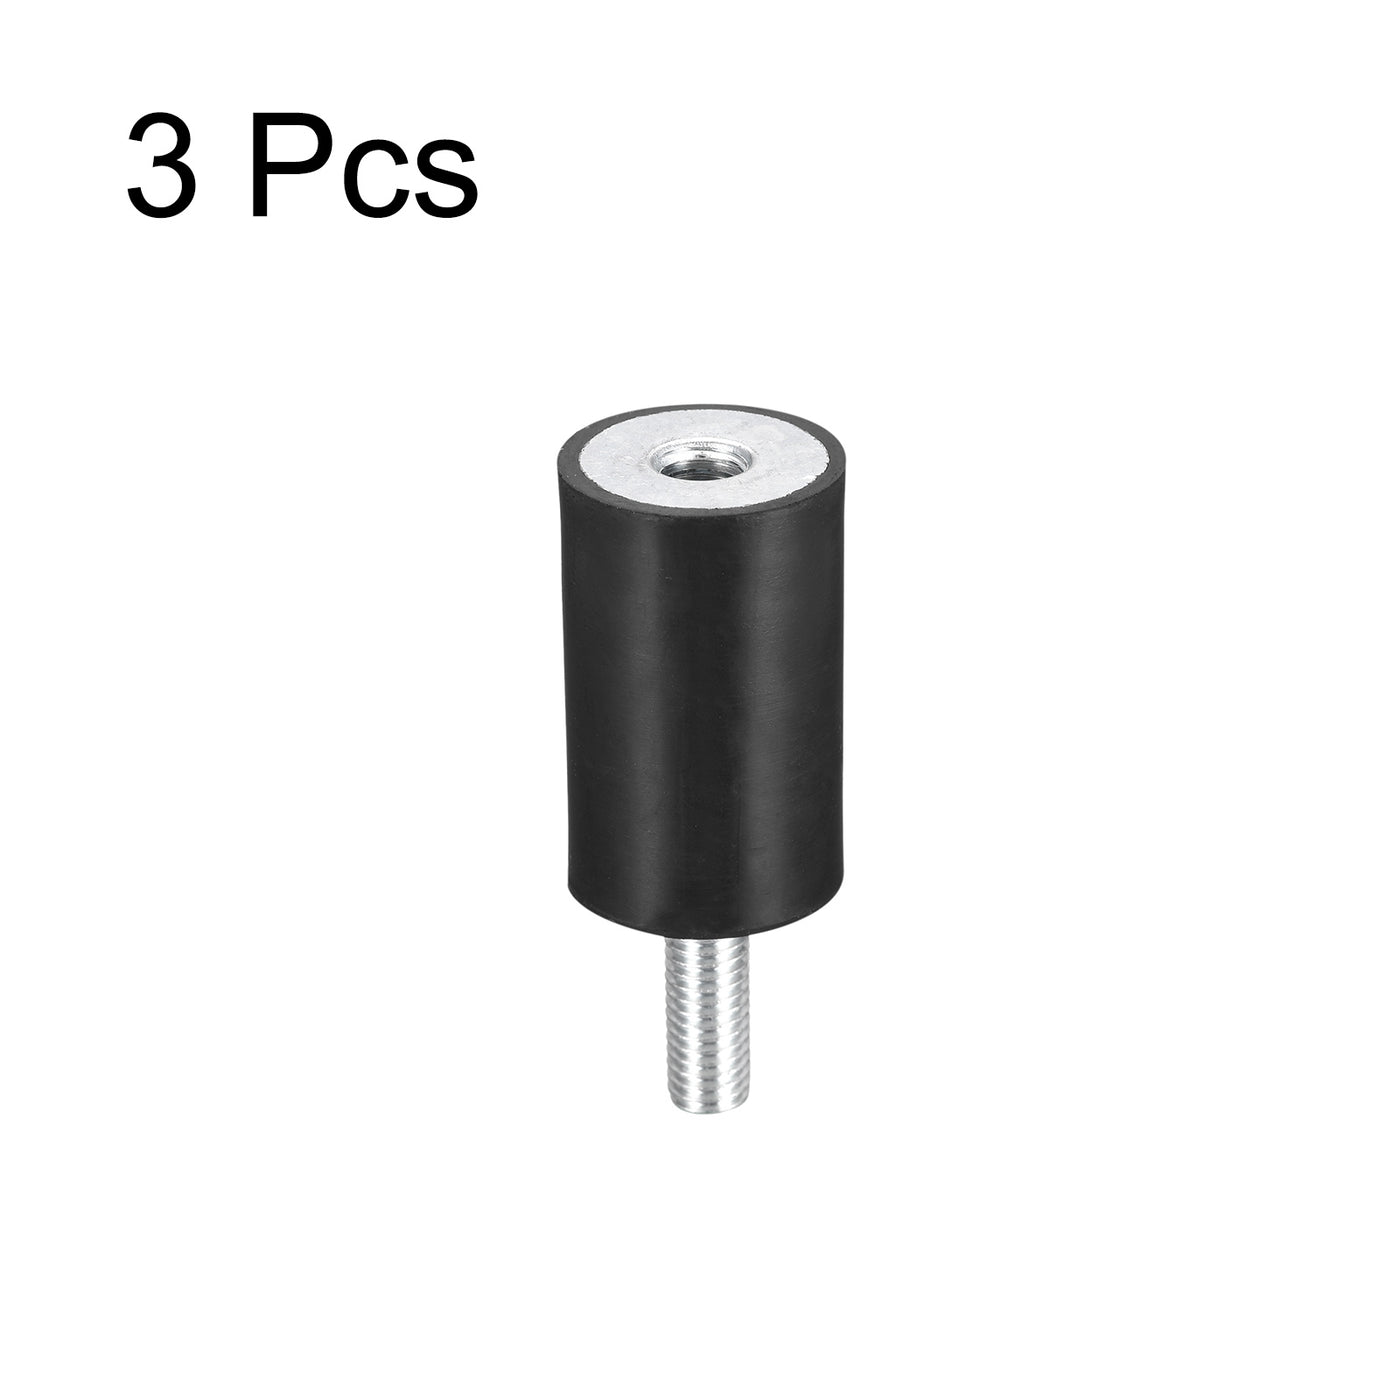 uxcell Uxcell Rubber Mount 3pcs M8 Male/Female Vibration Isolator Shock Absorber, D25mmxH40mm